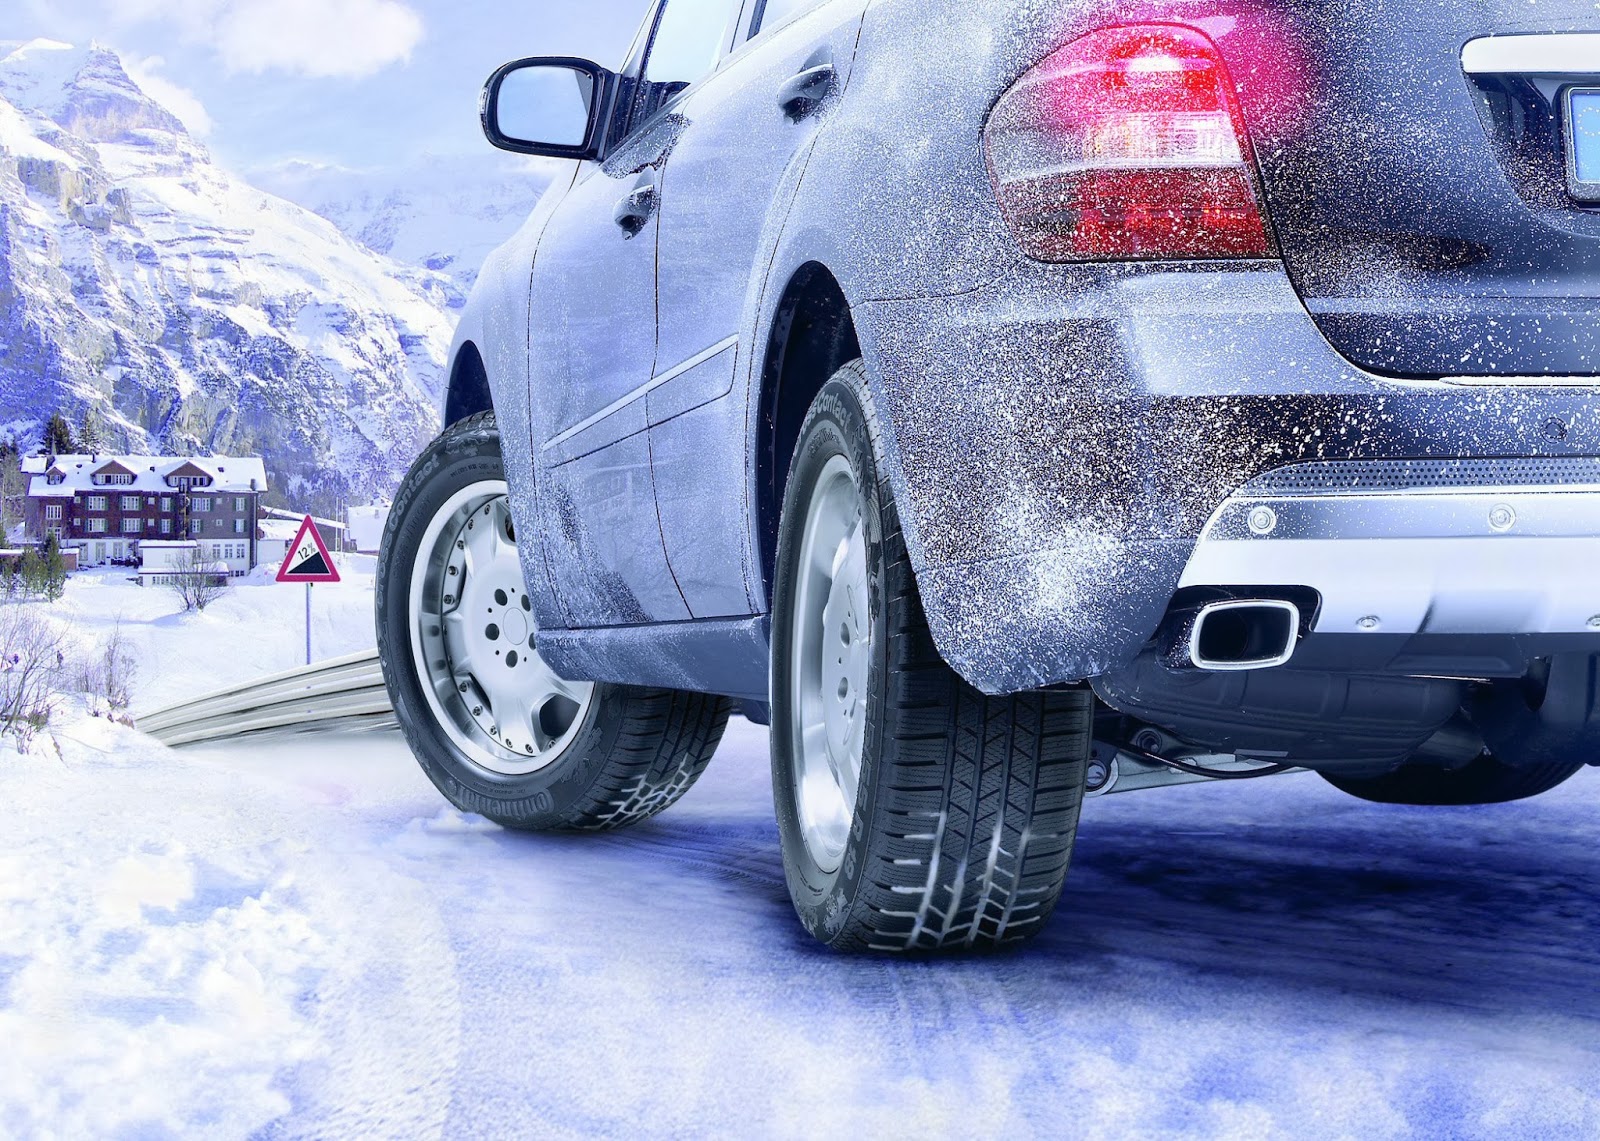 Getting Your Vehicle Ready For Winter